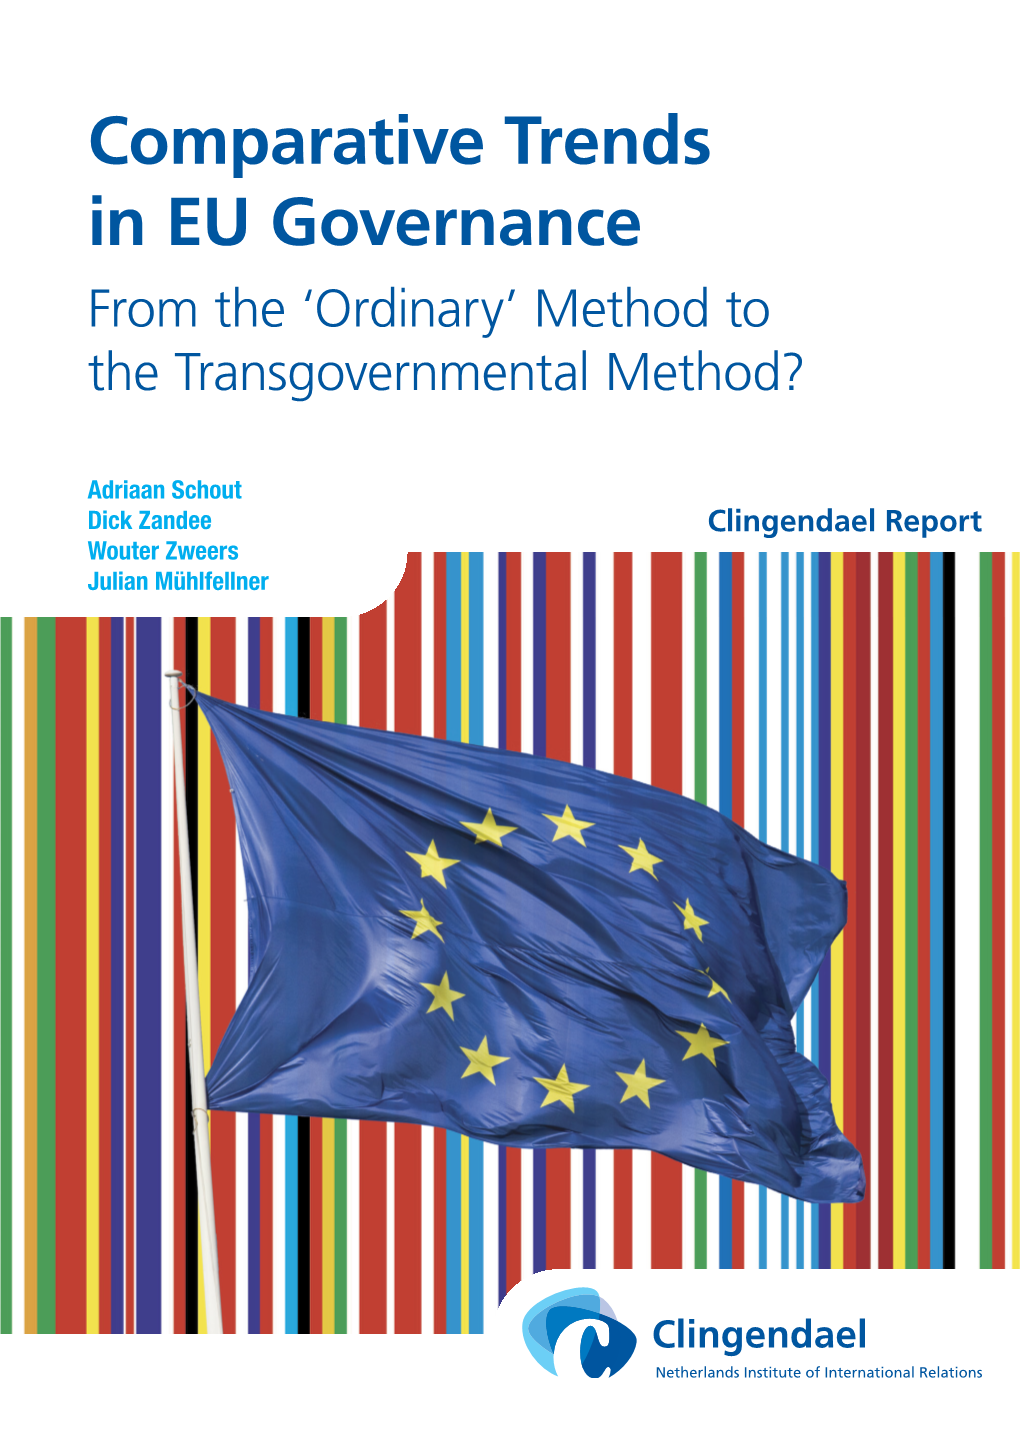 Comparative Trends in EU Governance from the ‘Ordinary’ Method to the Transgovernmental Method?